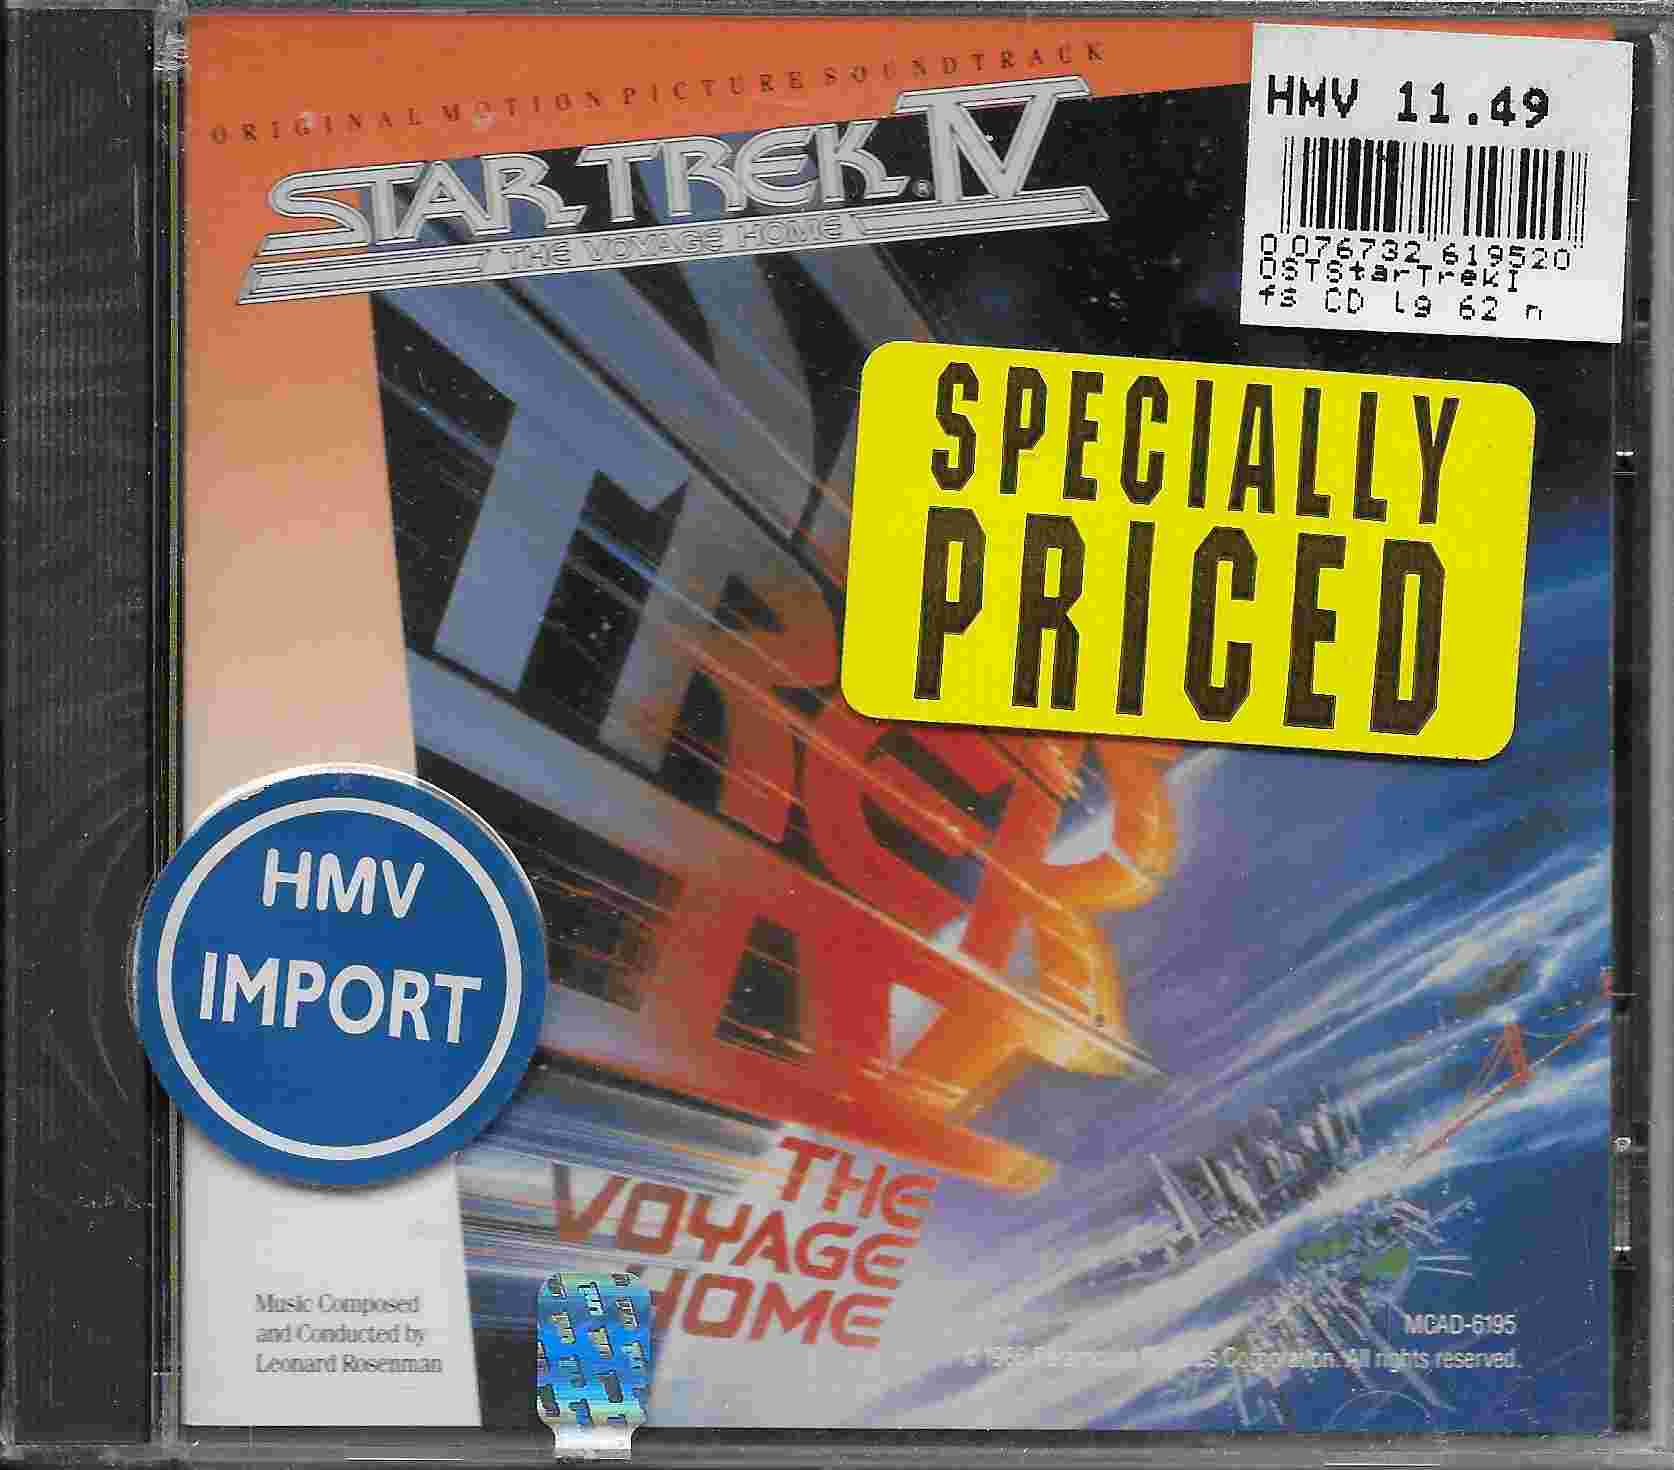 Picture of MCAD - 6195 Star trek IV - The voyage home (US import) by artist Unknown from the BBC cds - Records and Tapes library